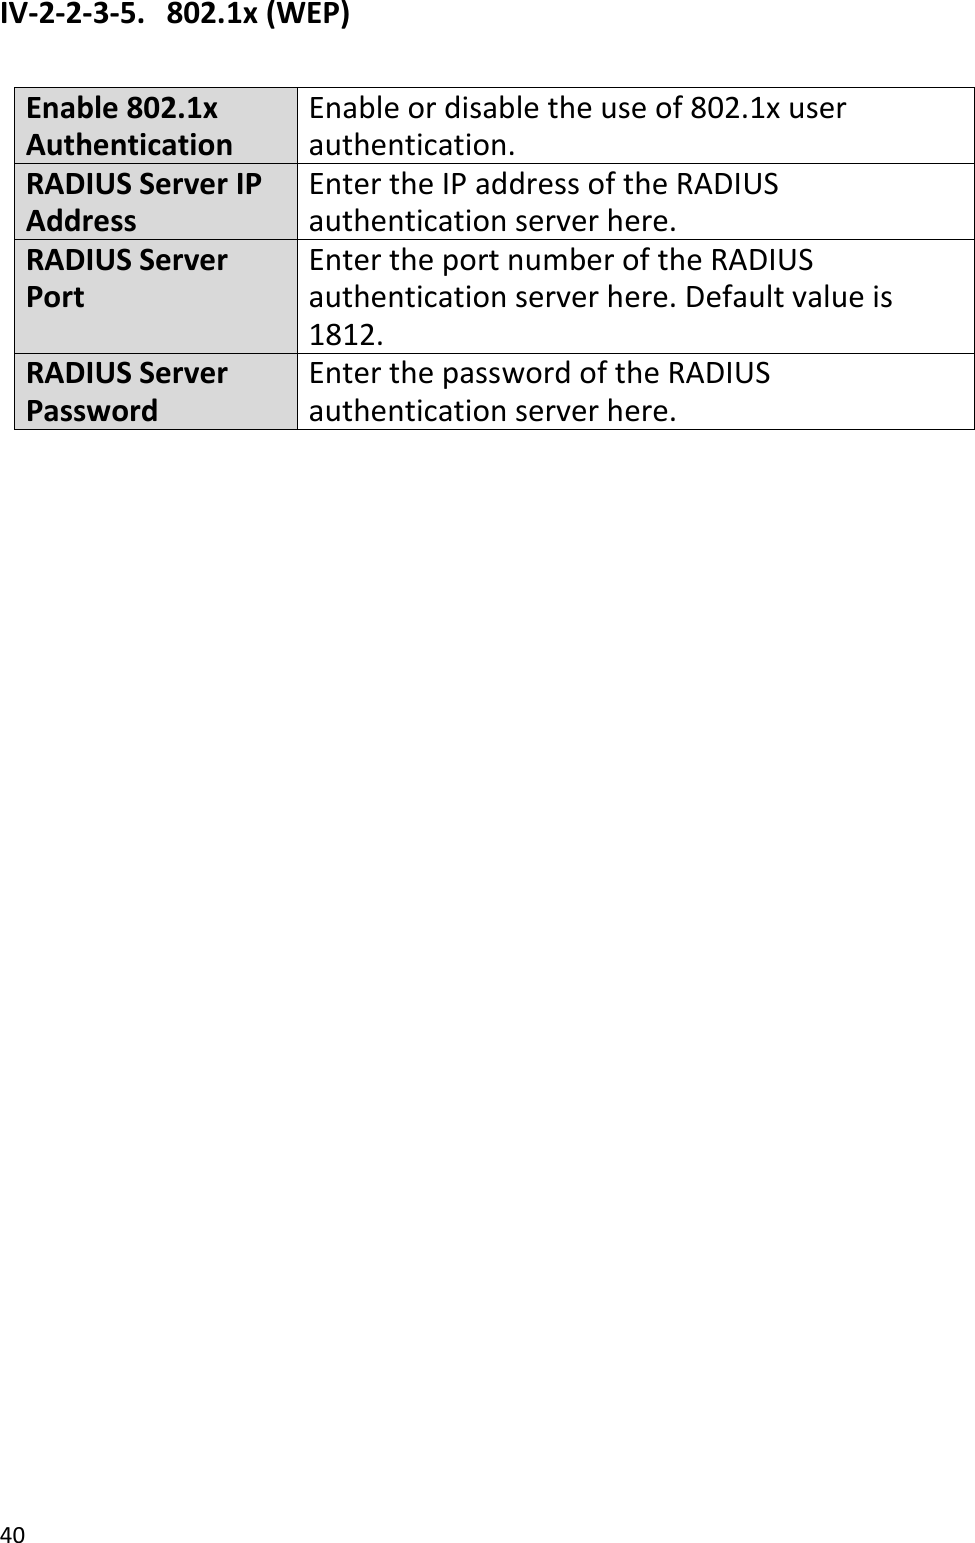 40  IV-2-2-3-5.   802.1x (WEP)  Enable 802.1x Authentication Enable or disable the use of 802.1x user authentication. RADIUS Server IP Address Enter the IP address of the RADIUS authentication server here. RADIUS Server Port Enter the port number of the RADIUS authentication server here. Default value is 1812. RADIUS Server Password Enter the password of the RADIUS authentication server here.   